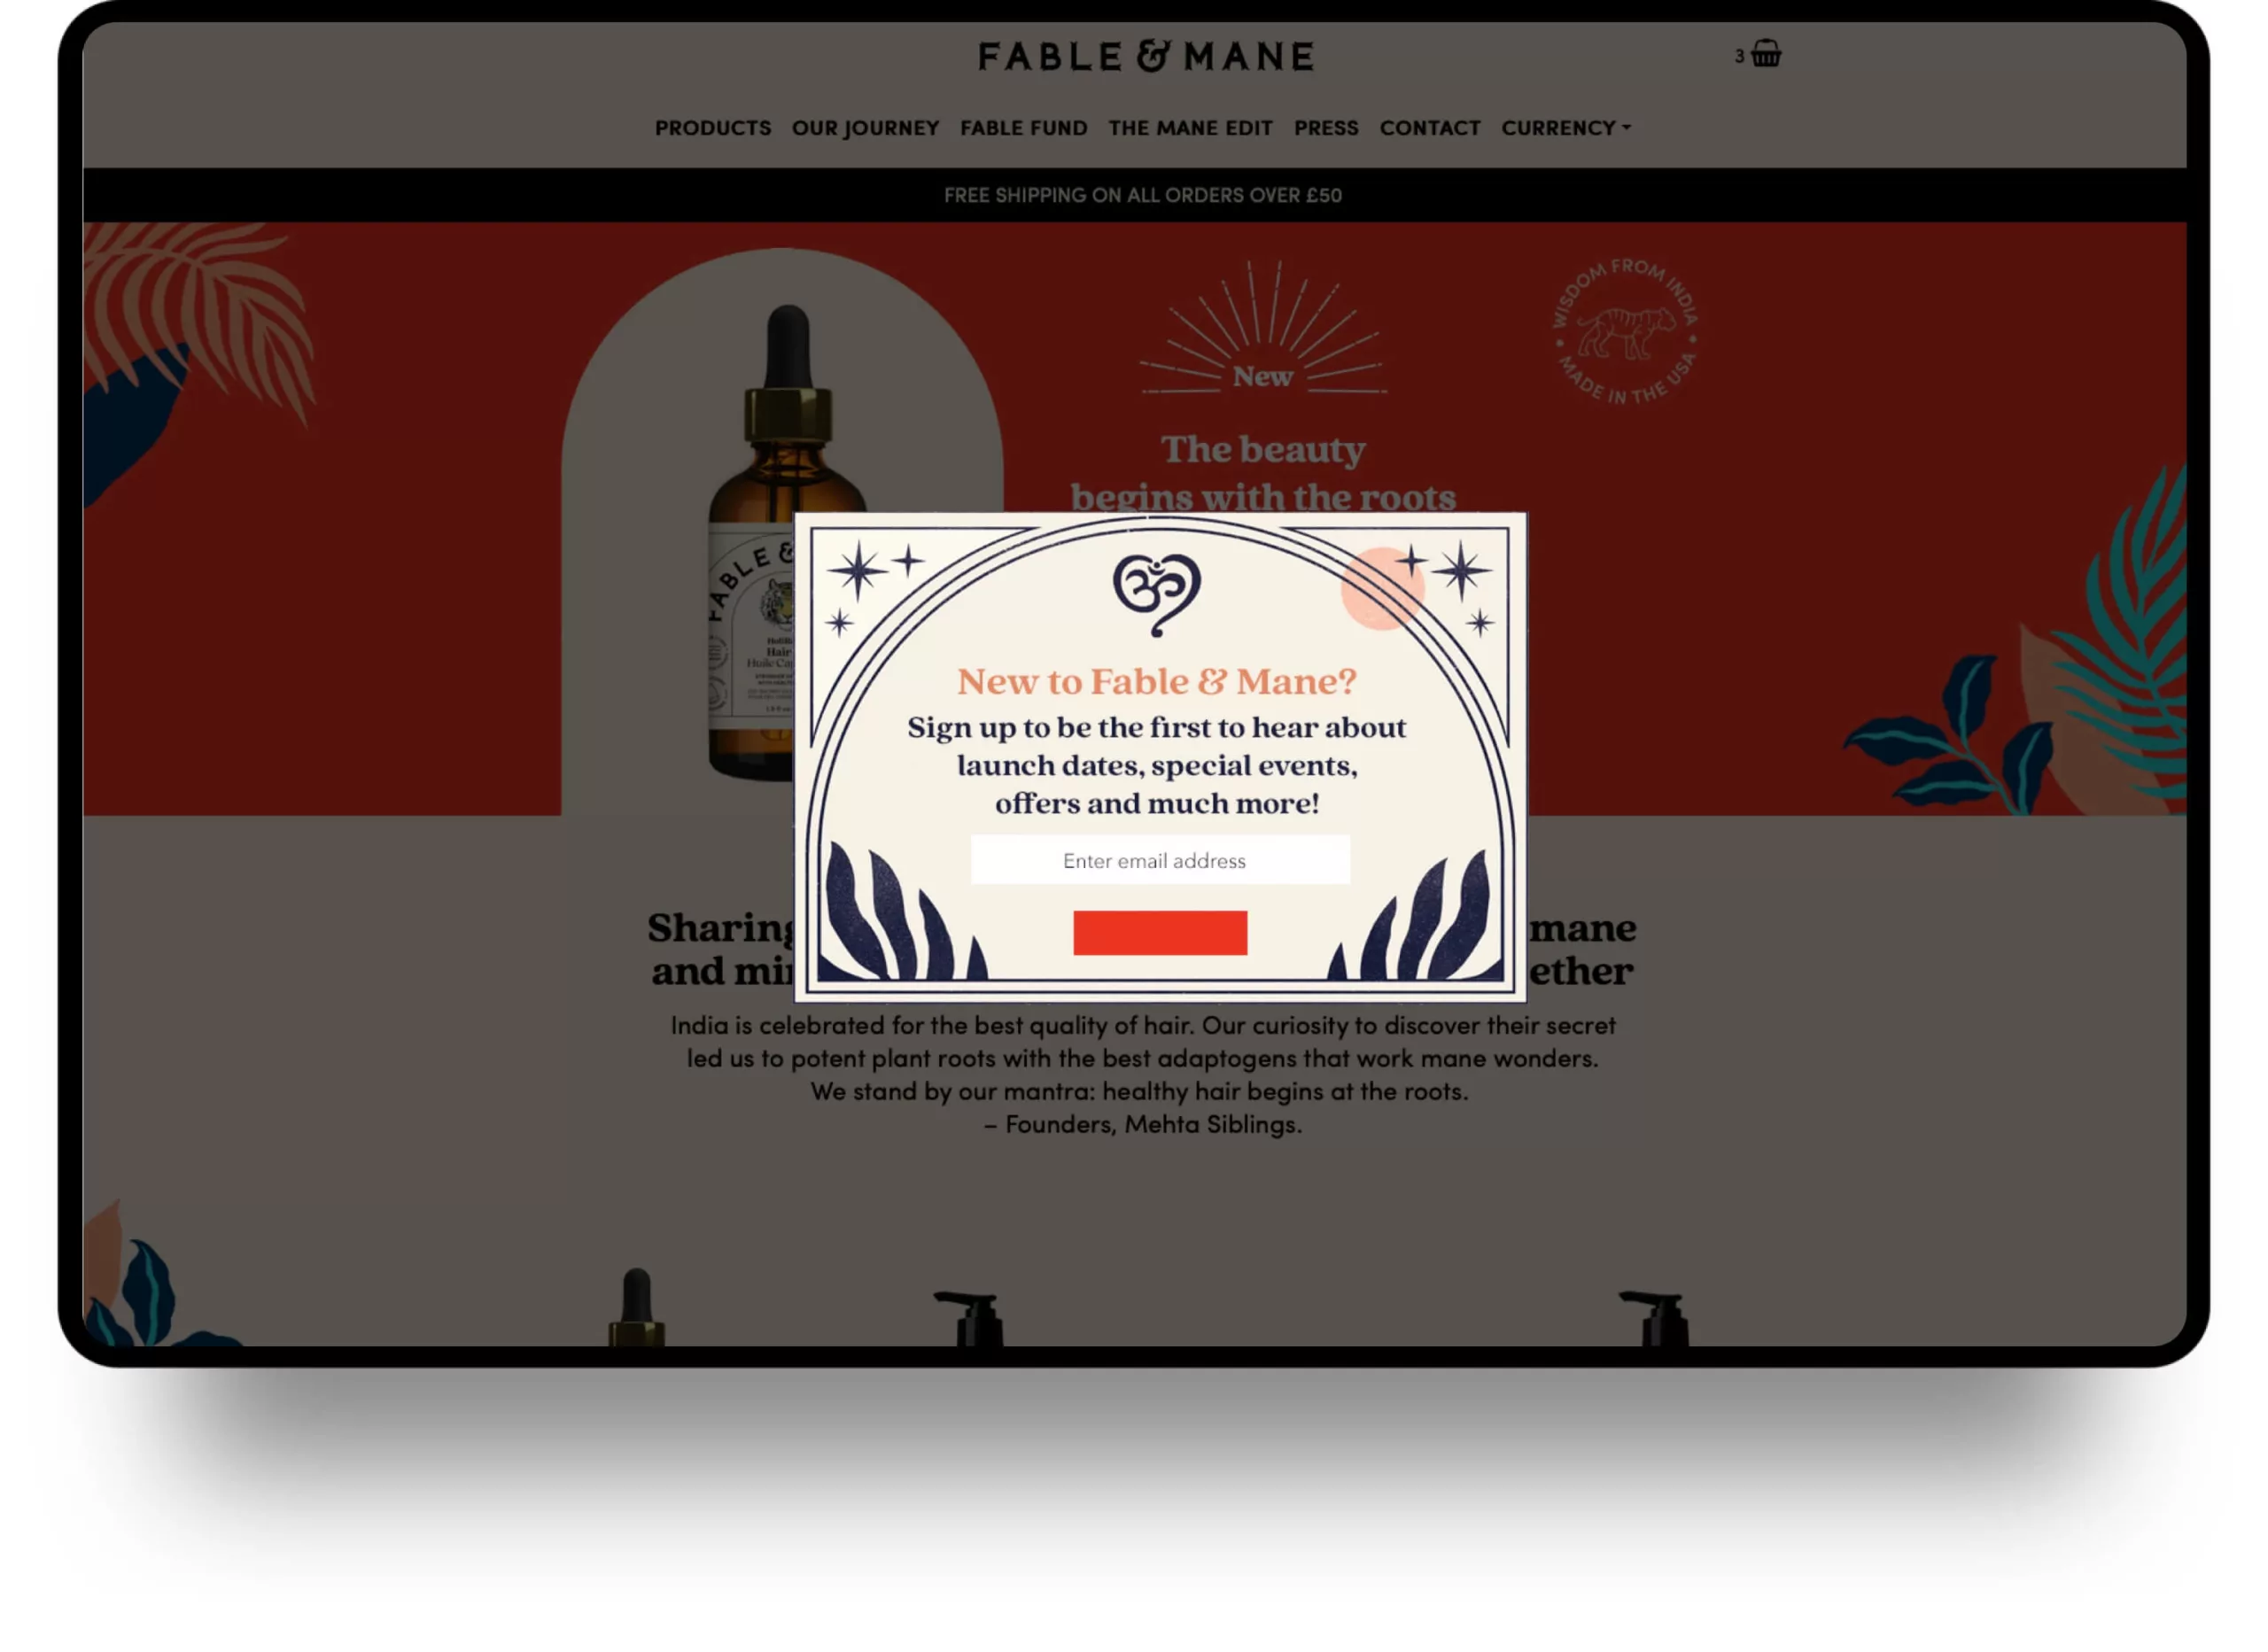 Website page inviting users to sign up for Fable & Mane newsletter